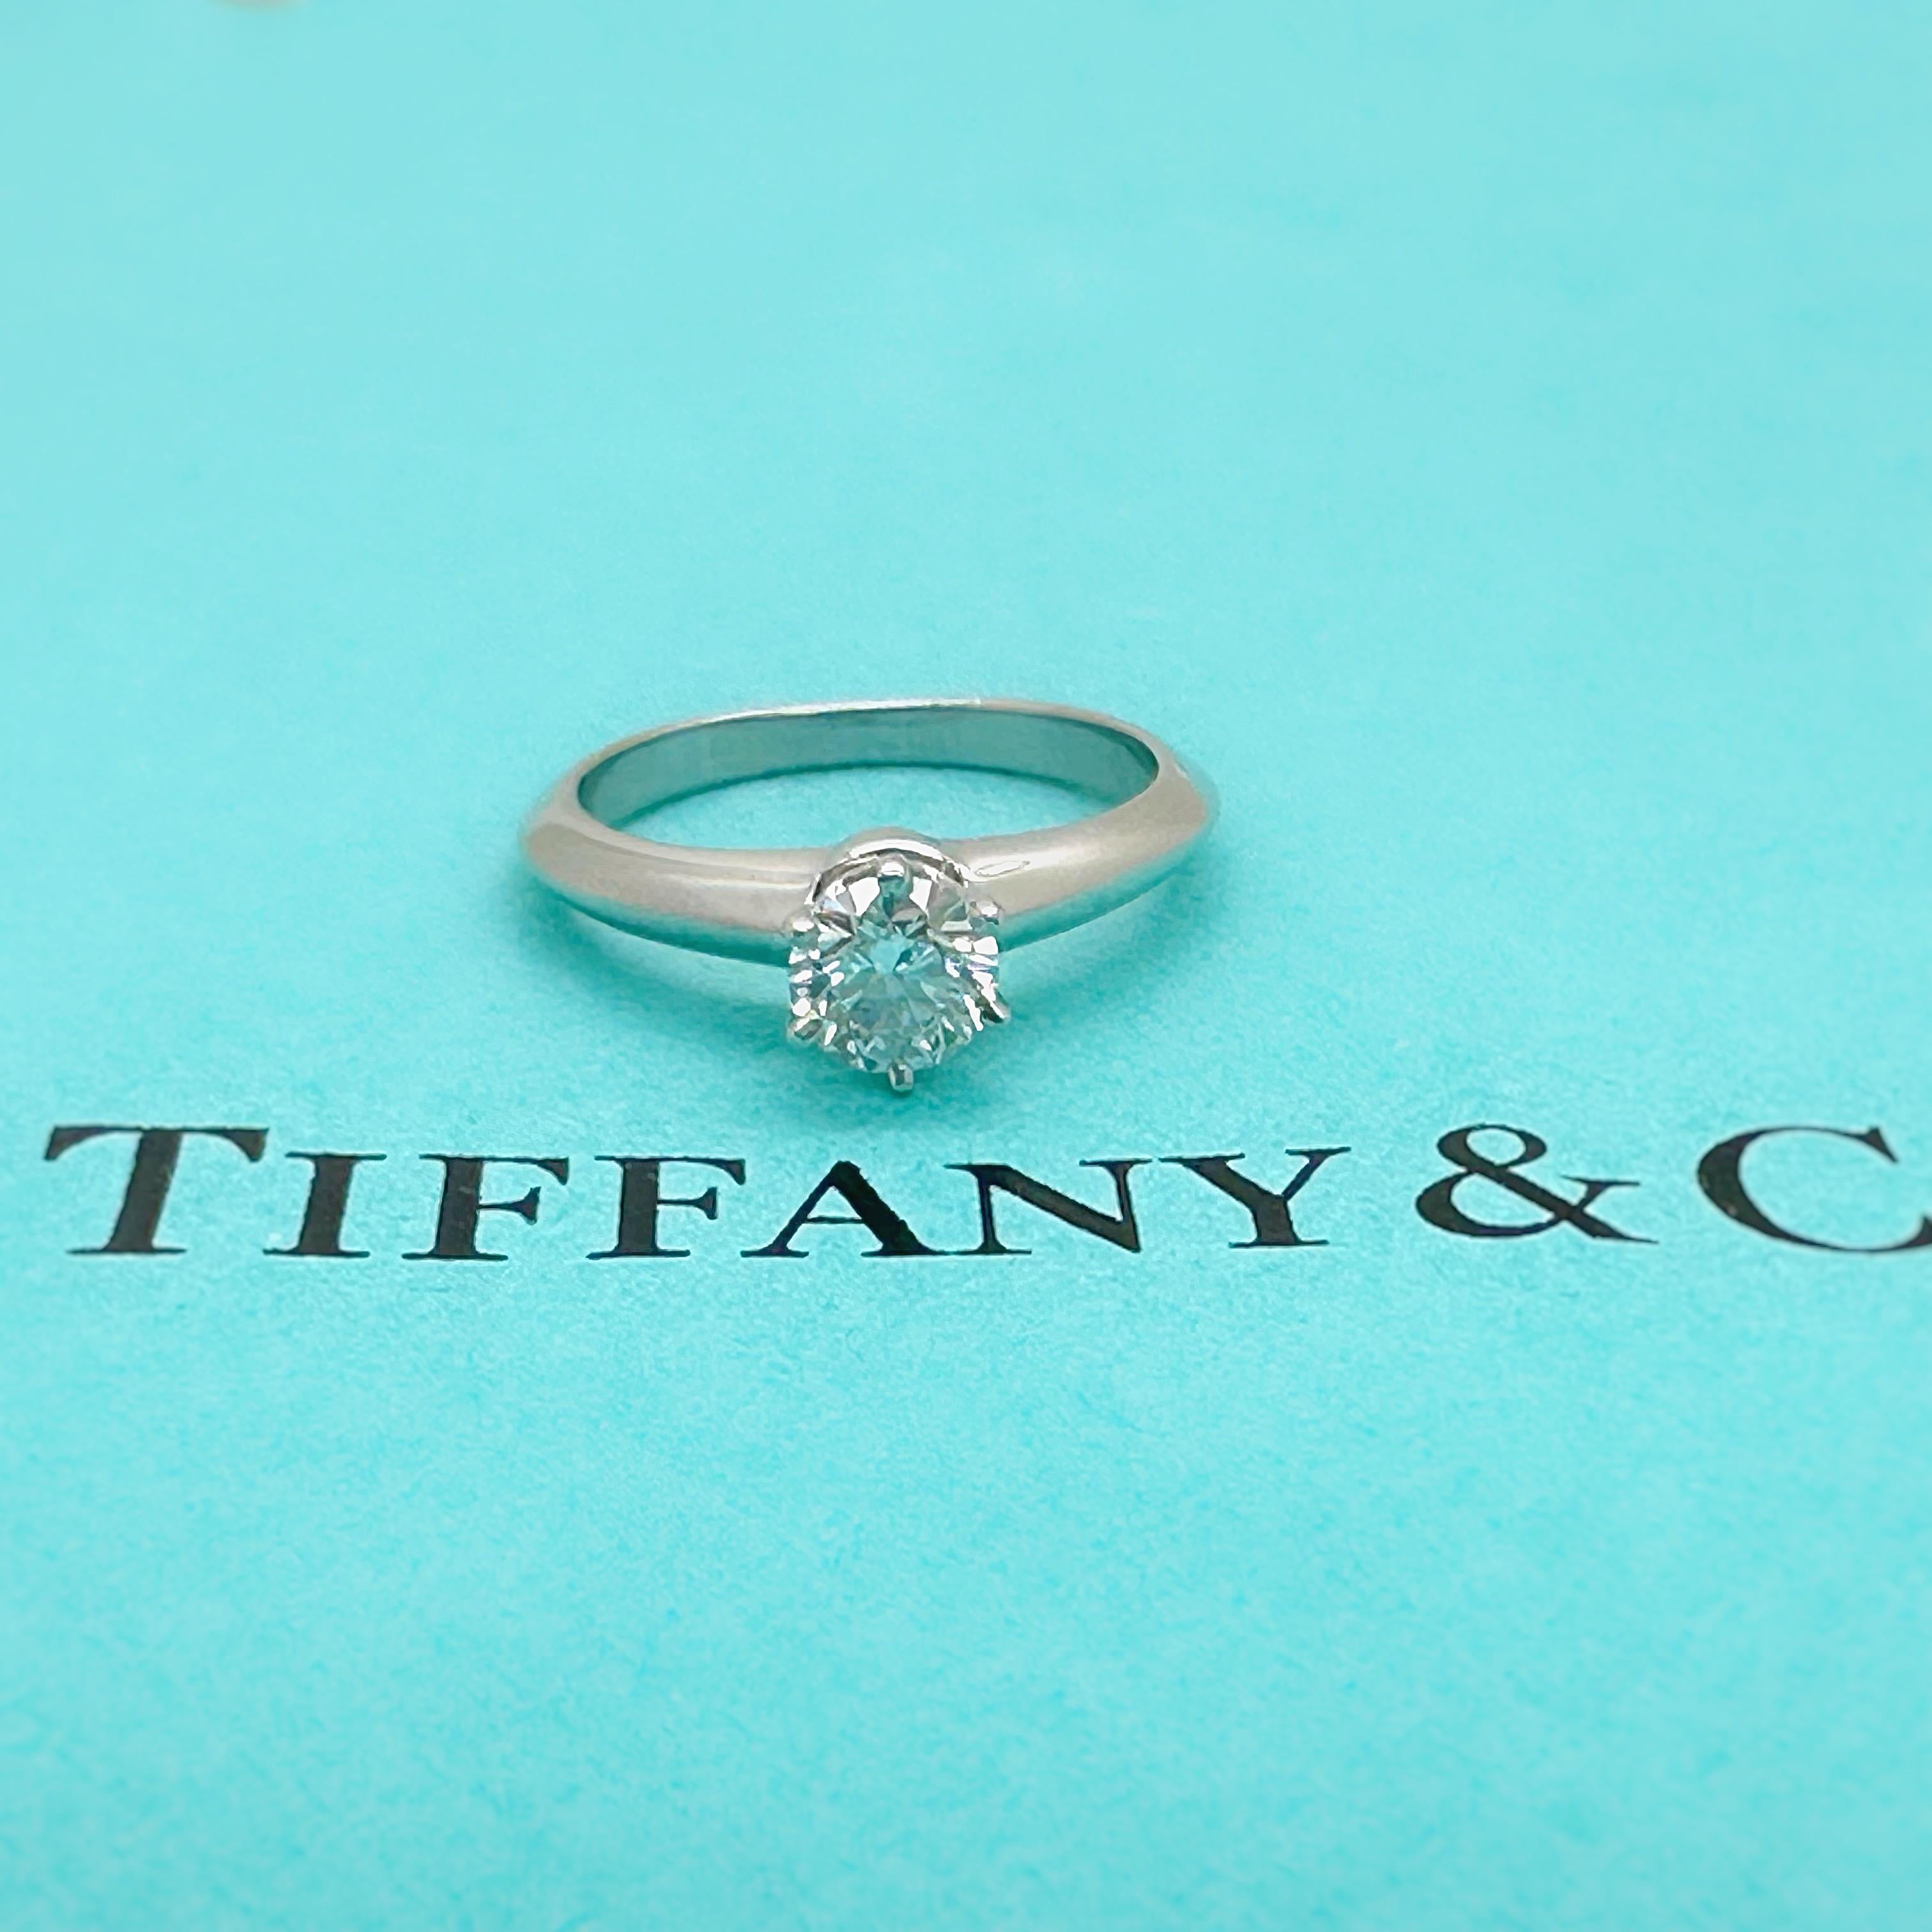 Tiffany & Co Round Brilliant Diamond 0.33 ct H VS1 Solitair Plat Engagement Ring For Sale 1